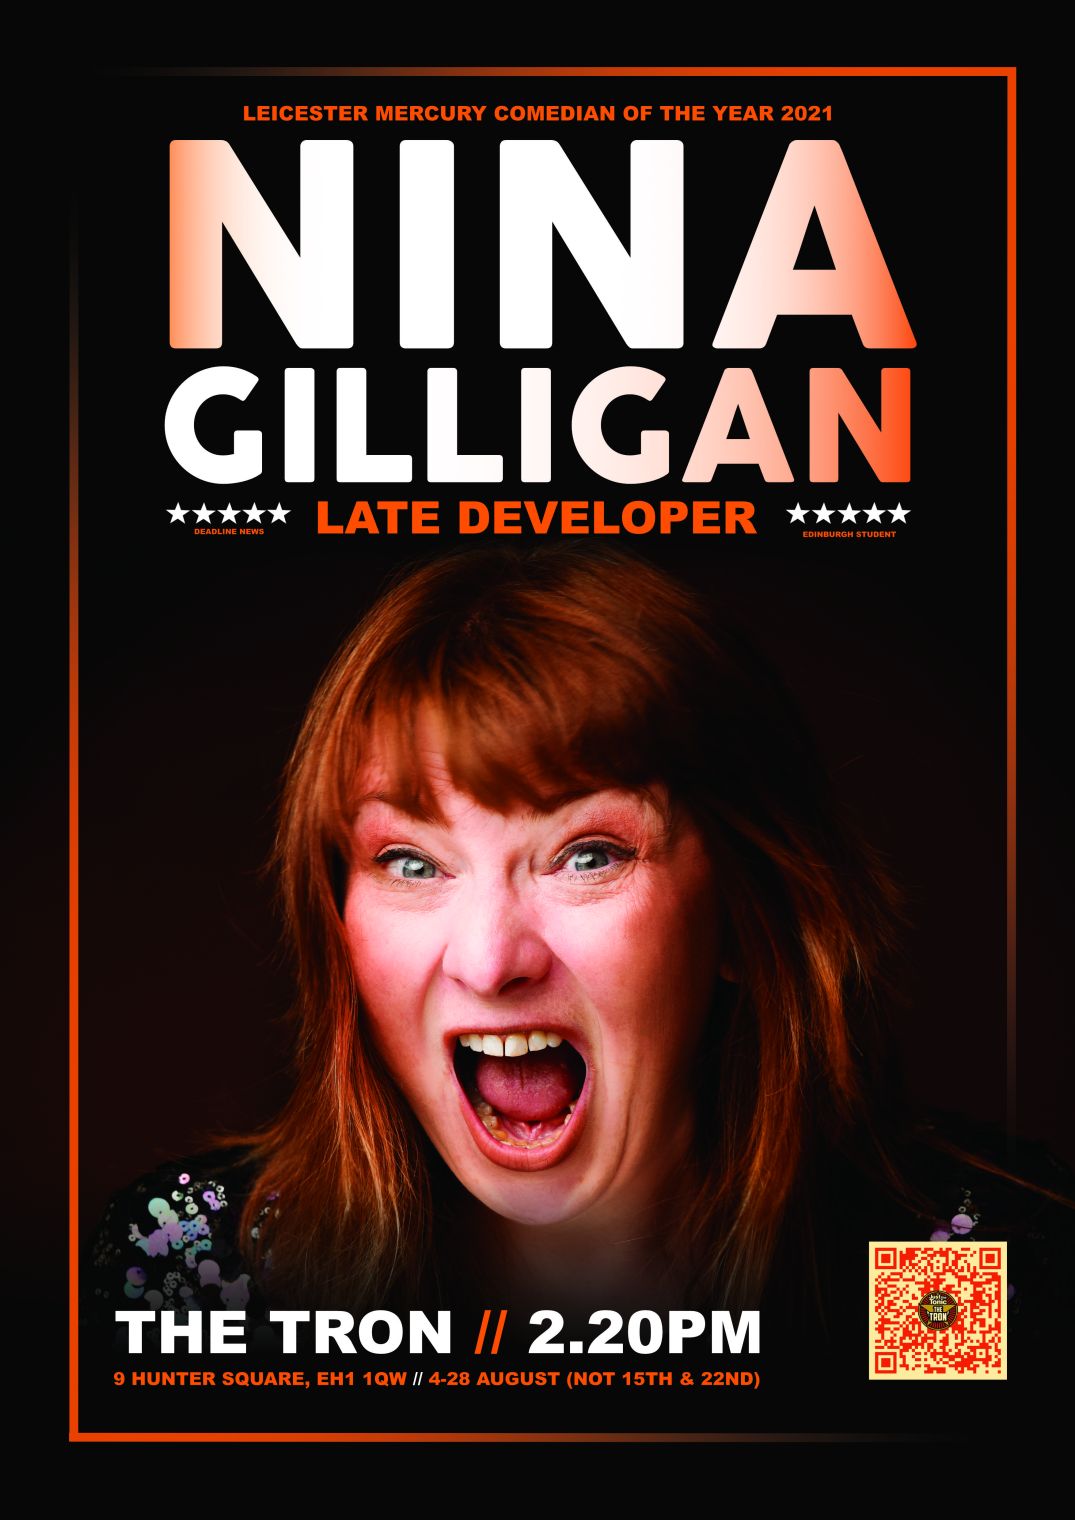 Nina Gilligan's Edinburgh show 'Late Developer' has been playing to sold out crowds across August